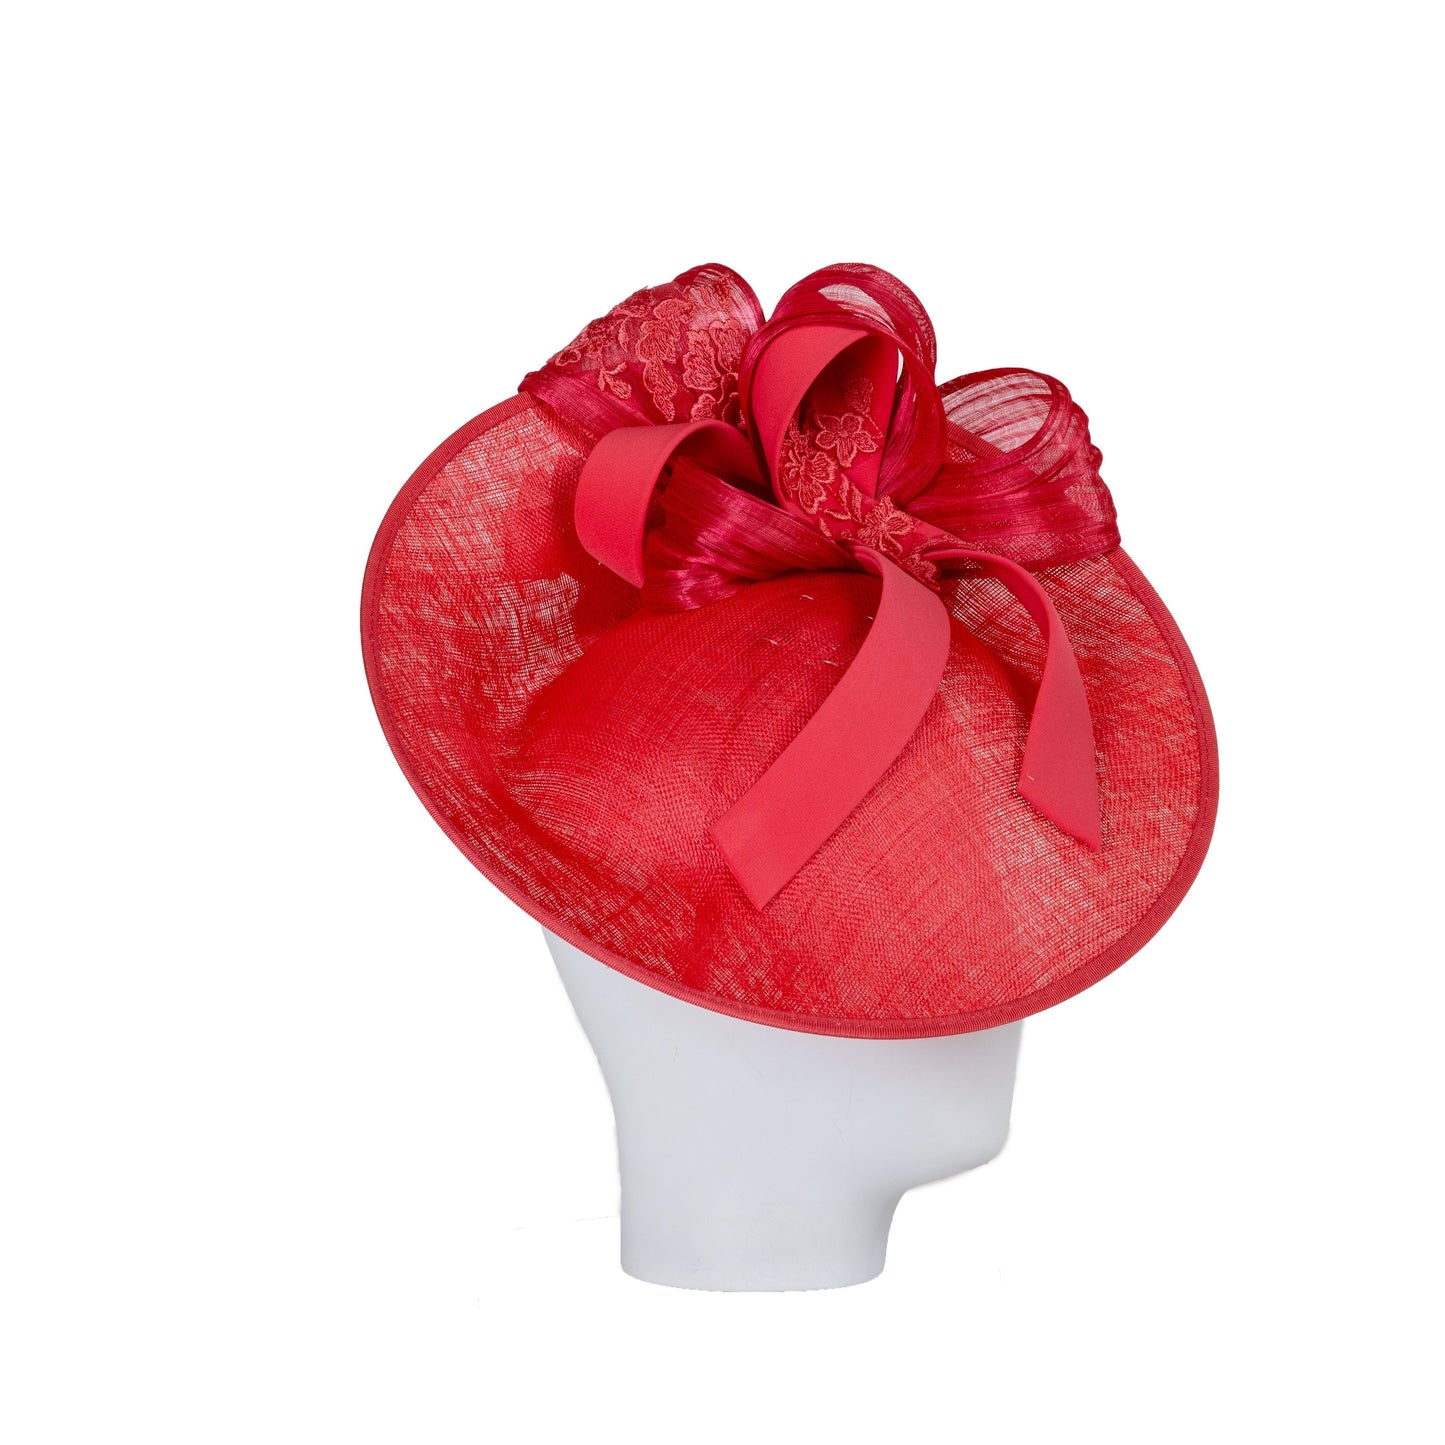 Melbourne Cup Red hat